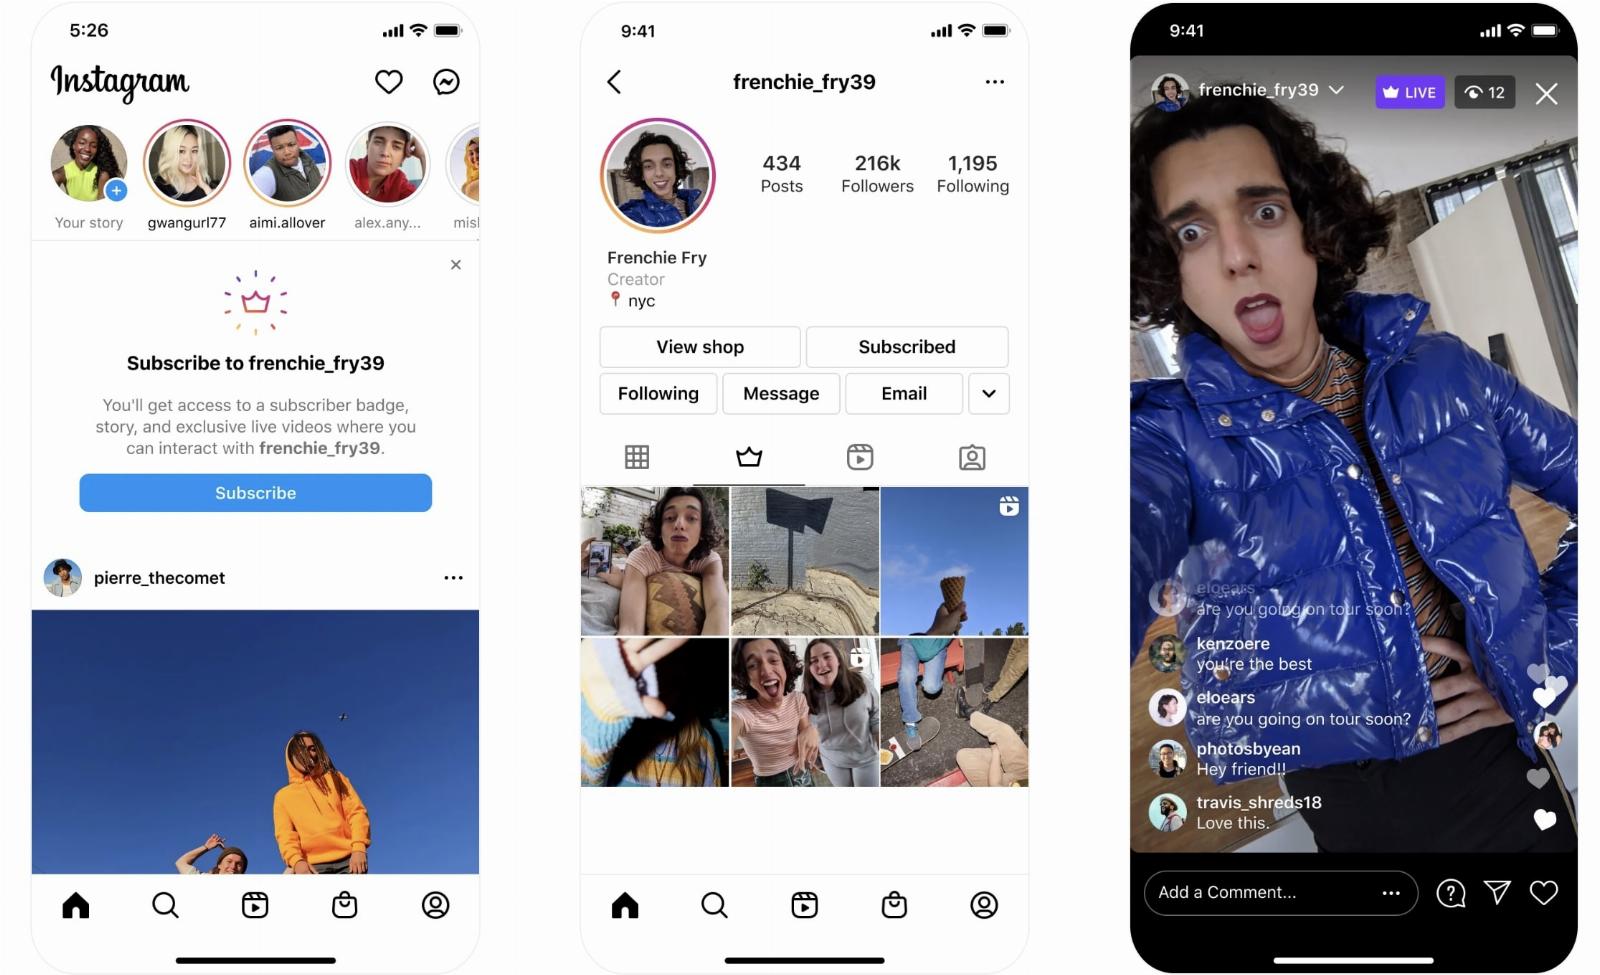 Instagram is launching creator subscriptions in Australia, Canada, the UK and more